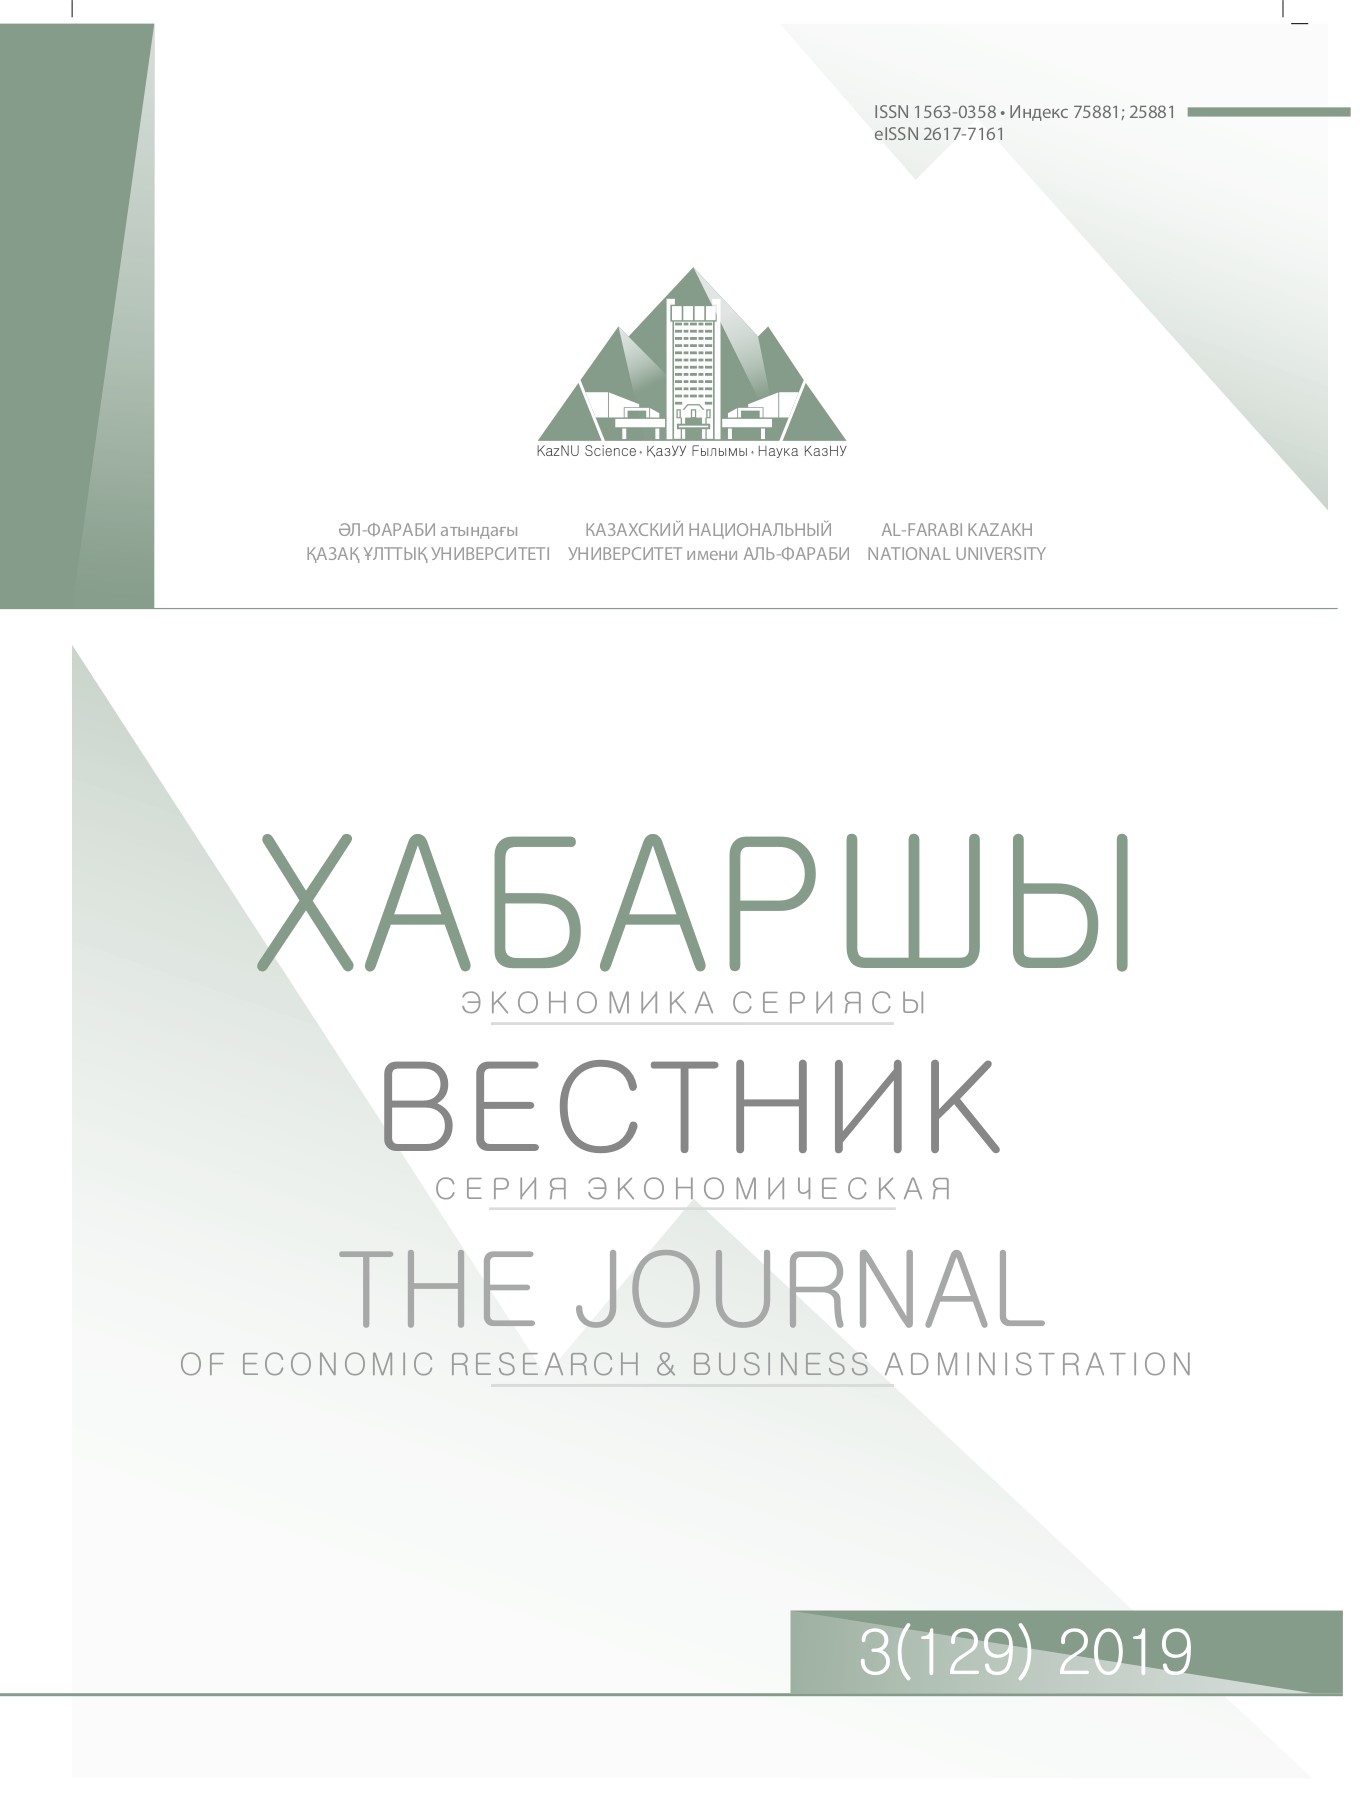 					View Vol. 129 No. 3 (2019): The Journal of Economic Research & Business Administration
				